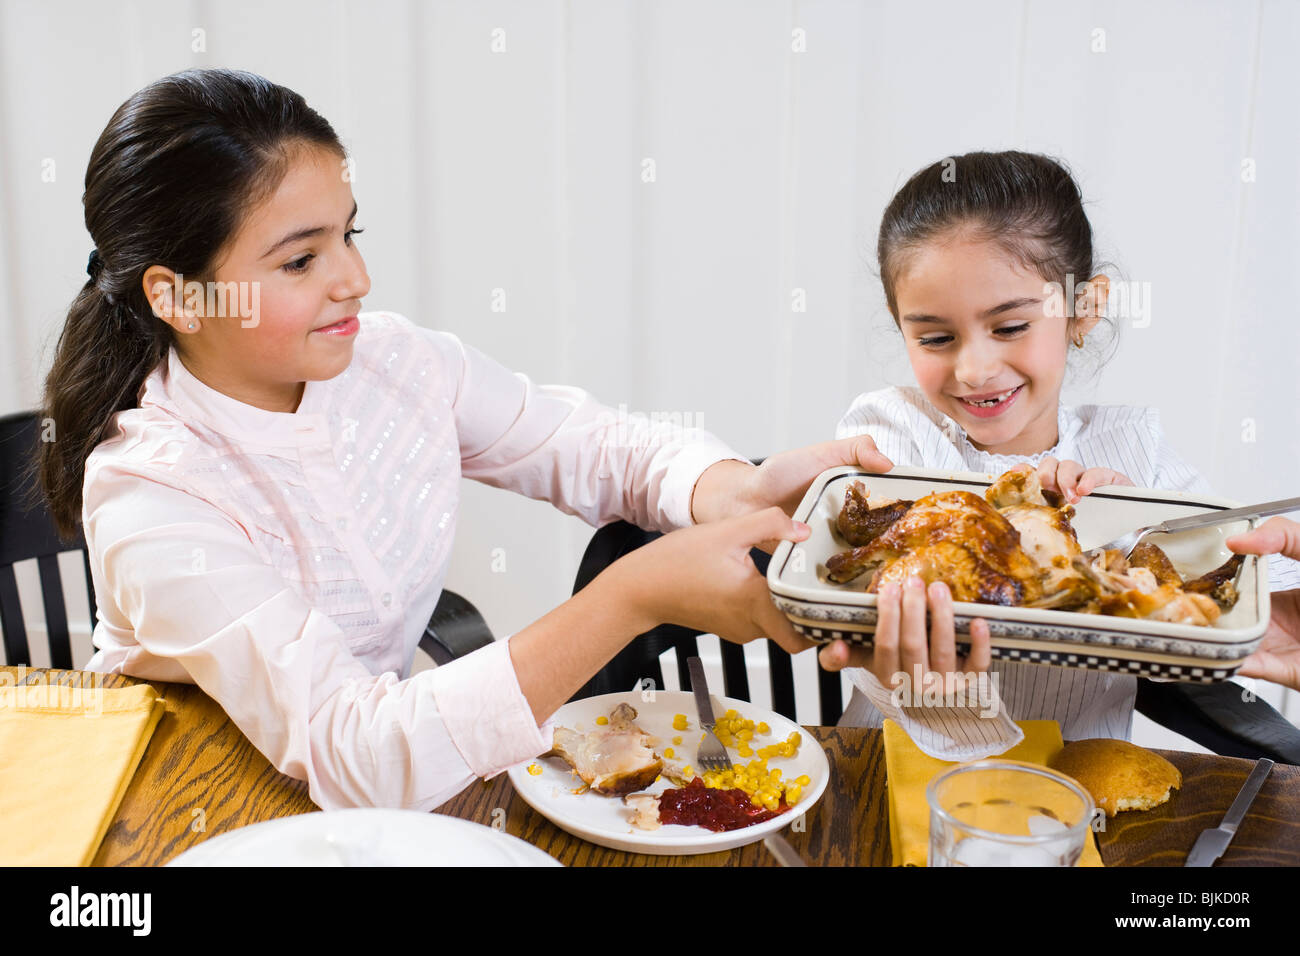 Family at dinner table smiling Stock Photo